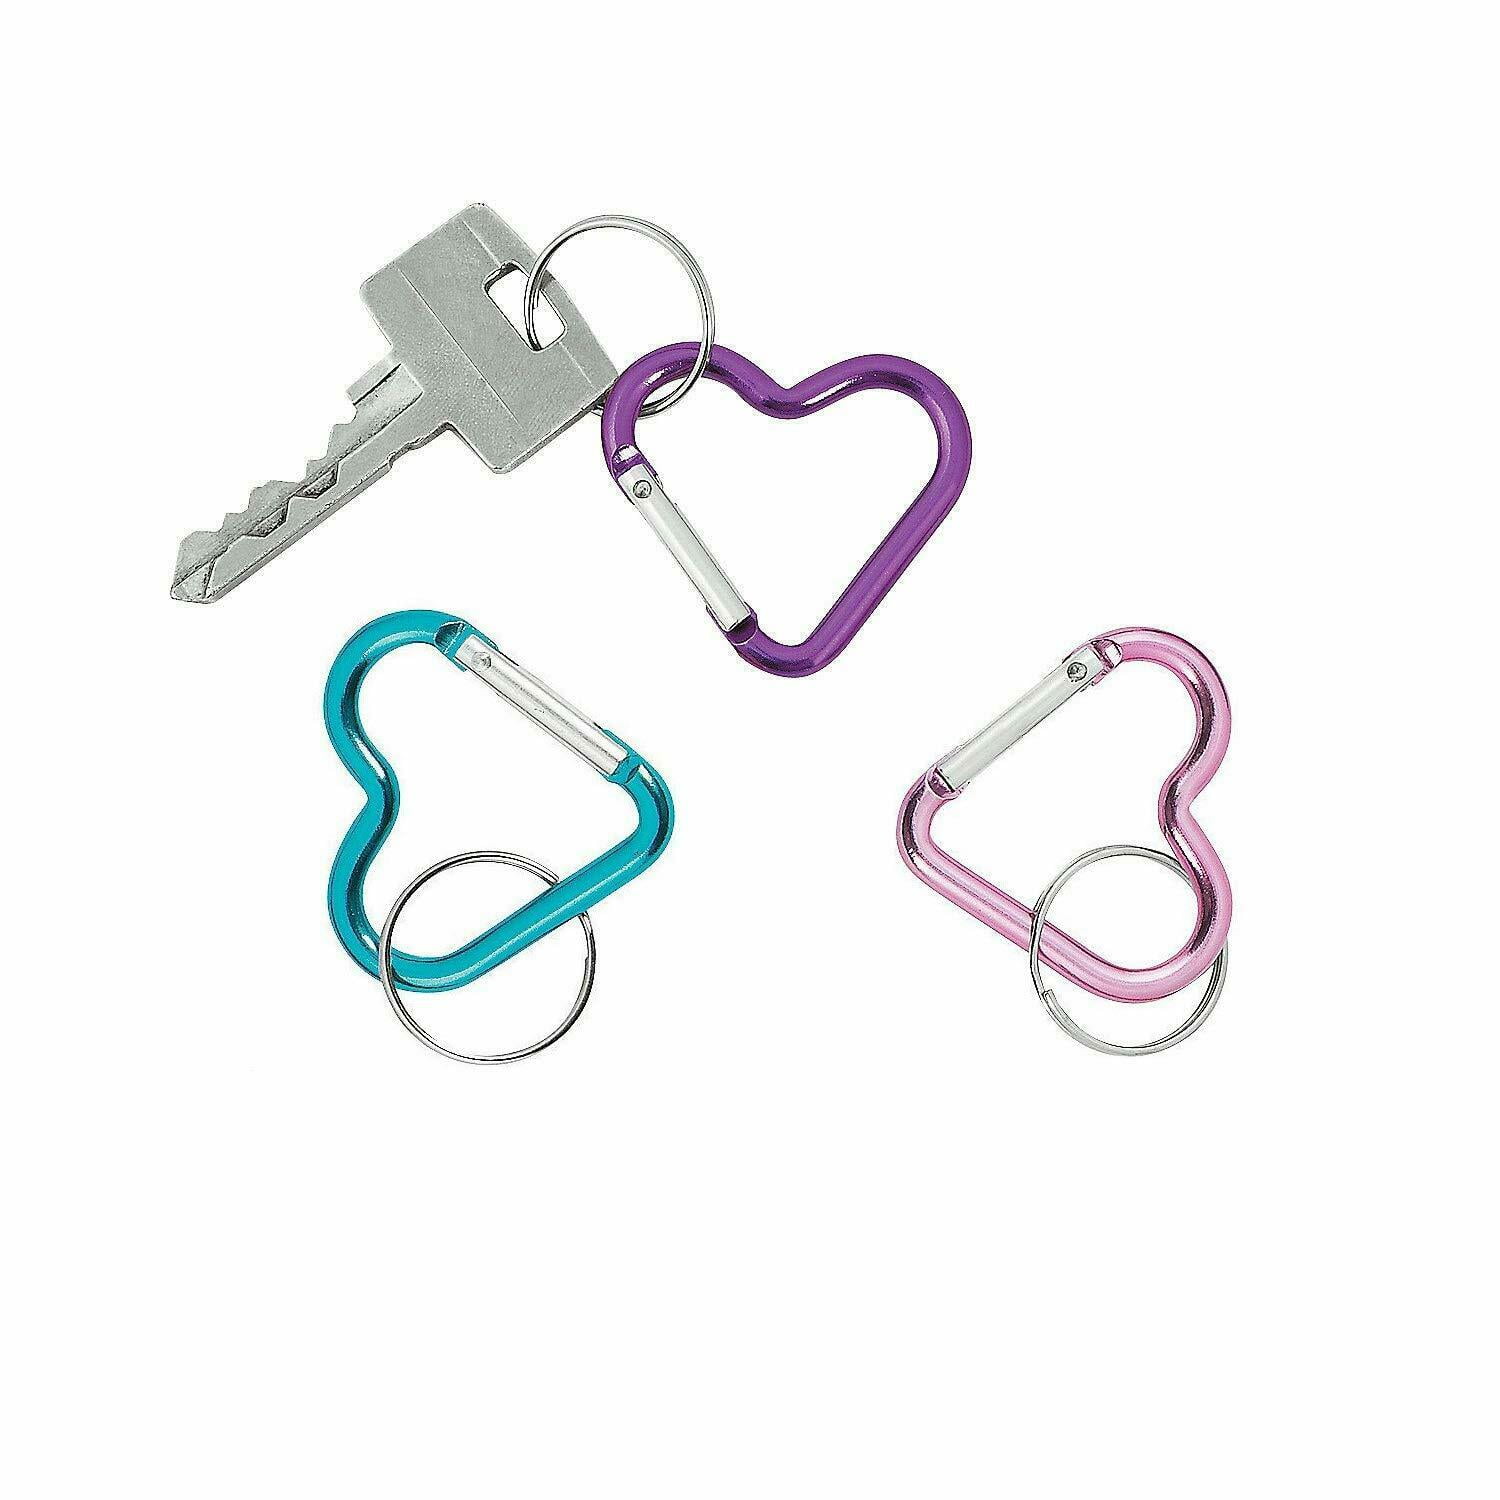 Bonison Heart Shaped Gift Aluminum Alloy Carabiner Hook Snap Clip Key Holder Keychain Tool Party Favors Camping Hiking Backpack Accessory Pastel Color Assortment 